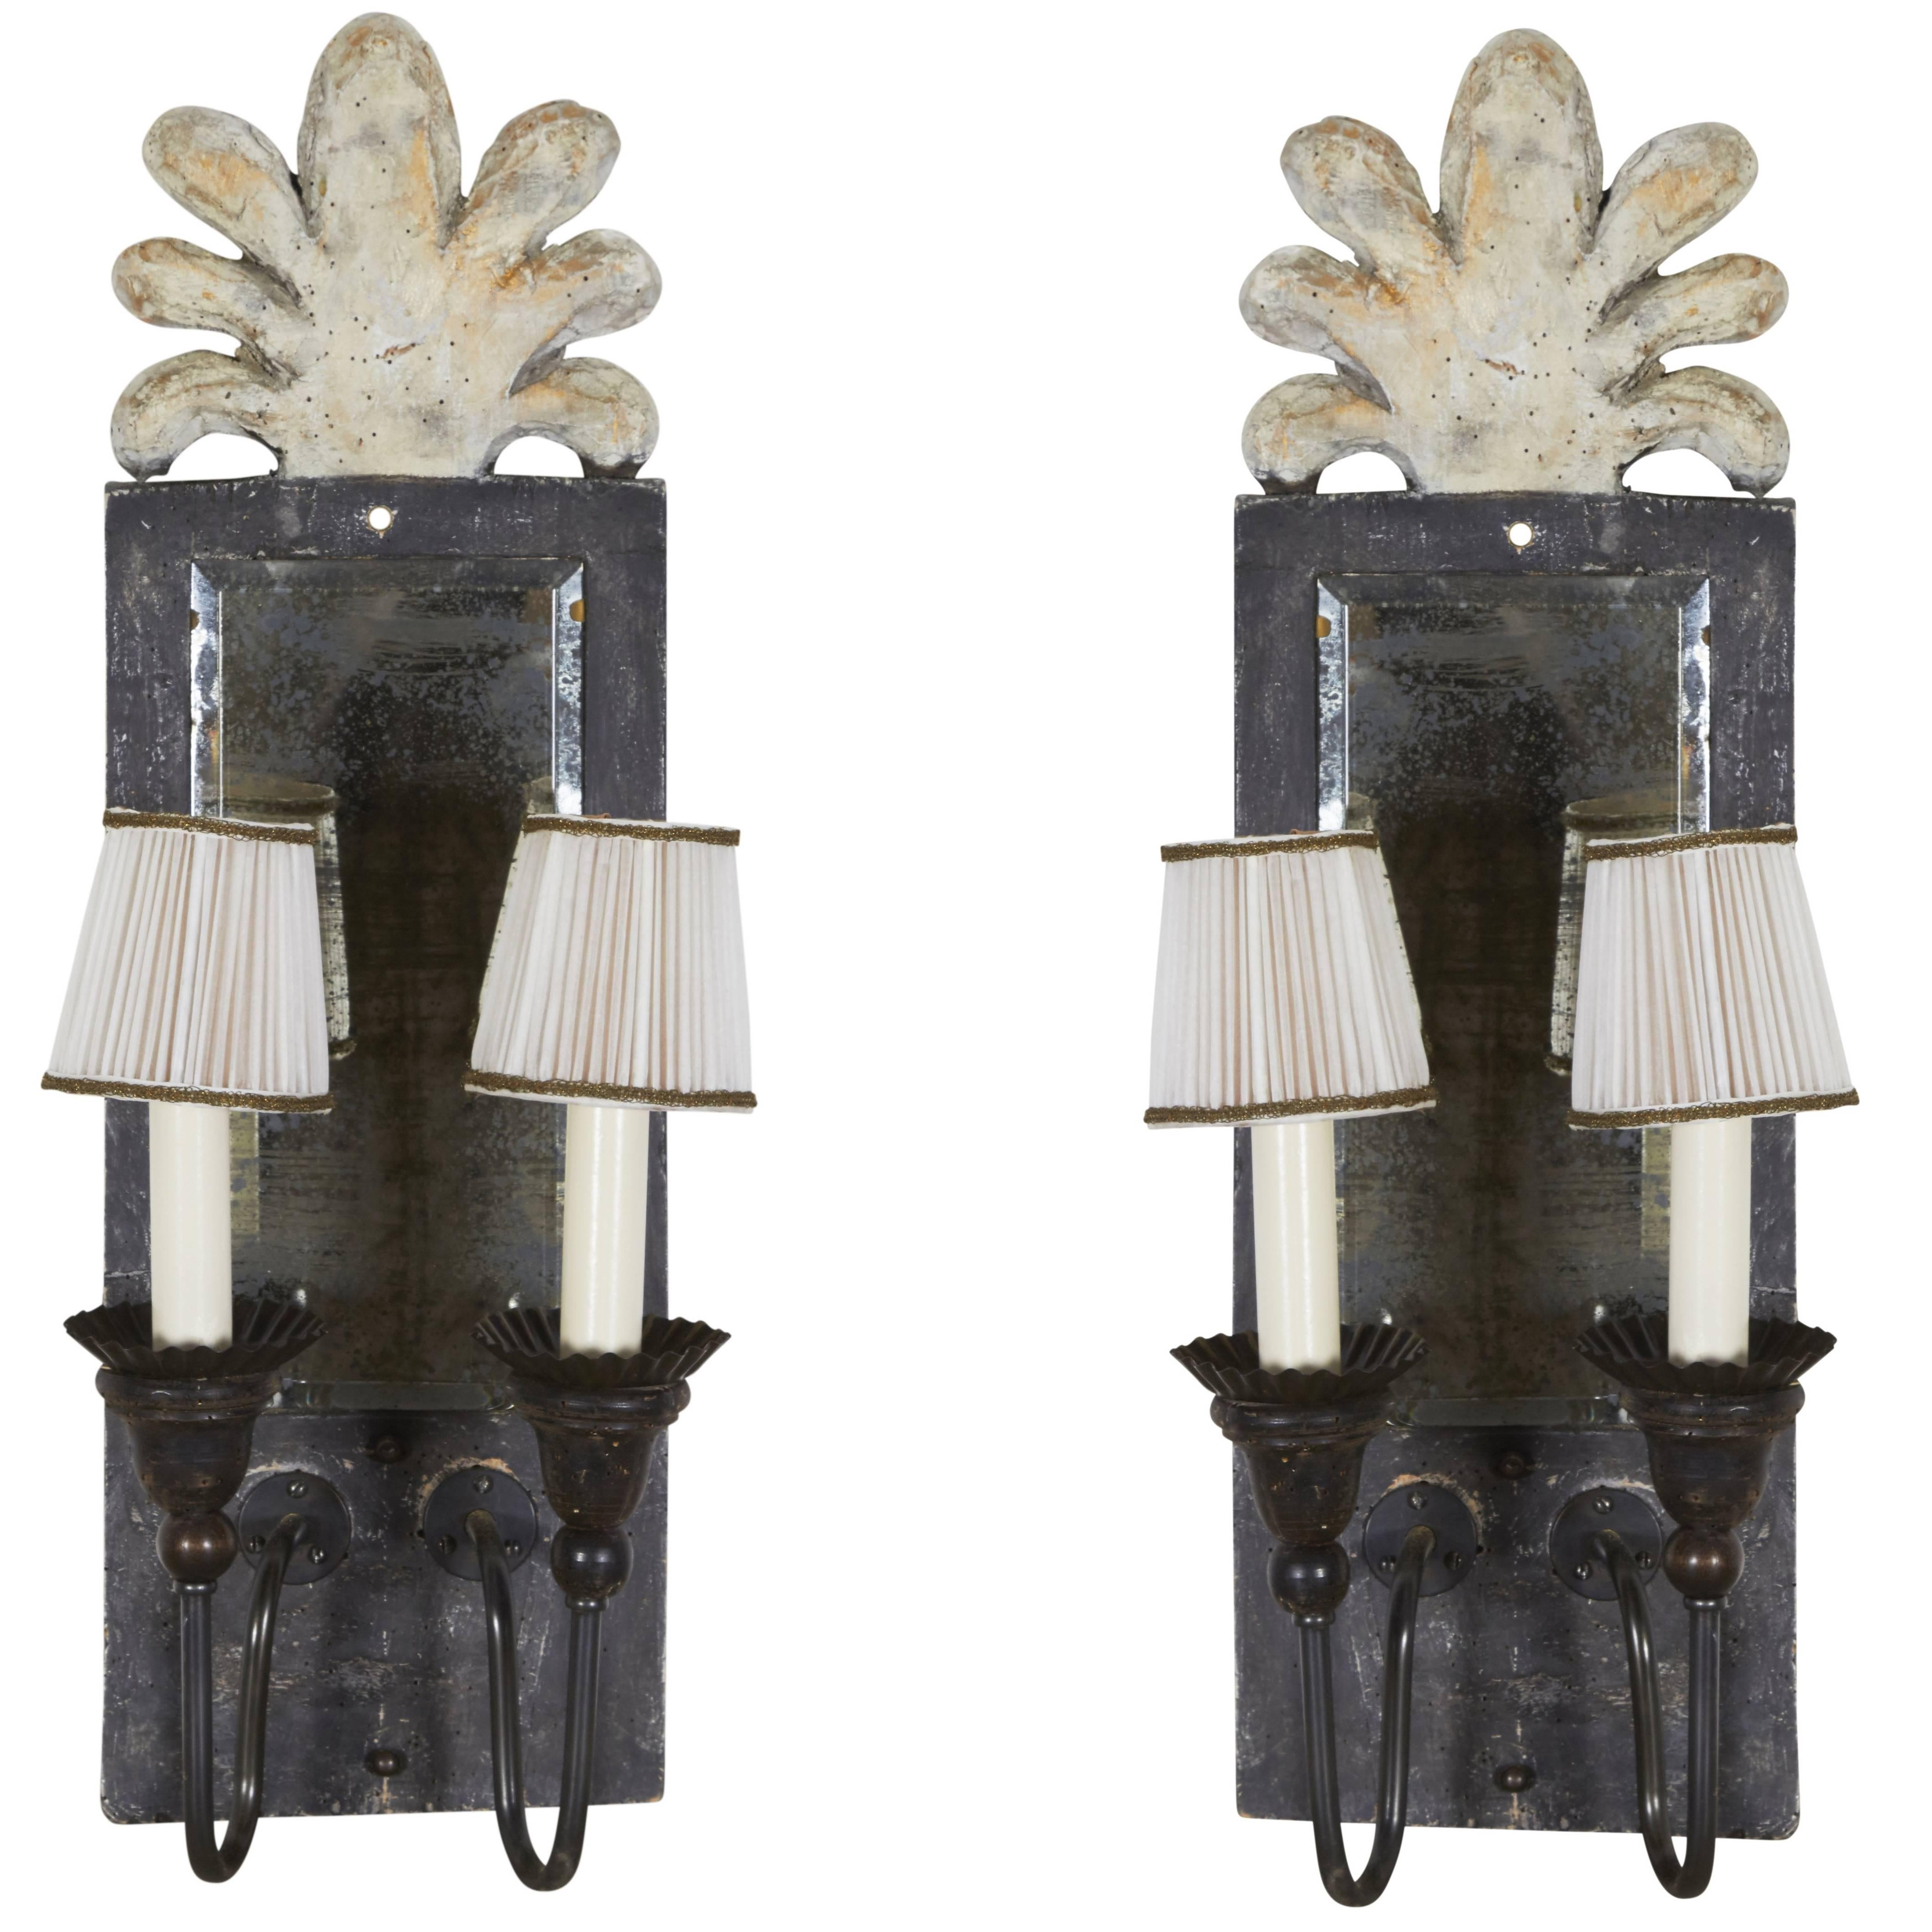 Pair of Mirror-Backed Antiqued Wood Sconces